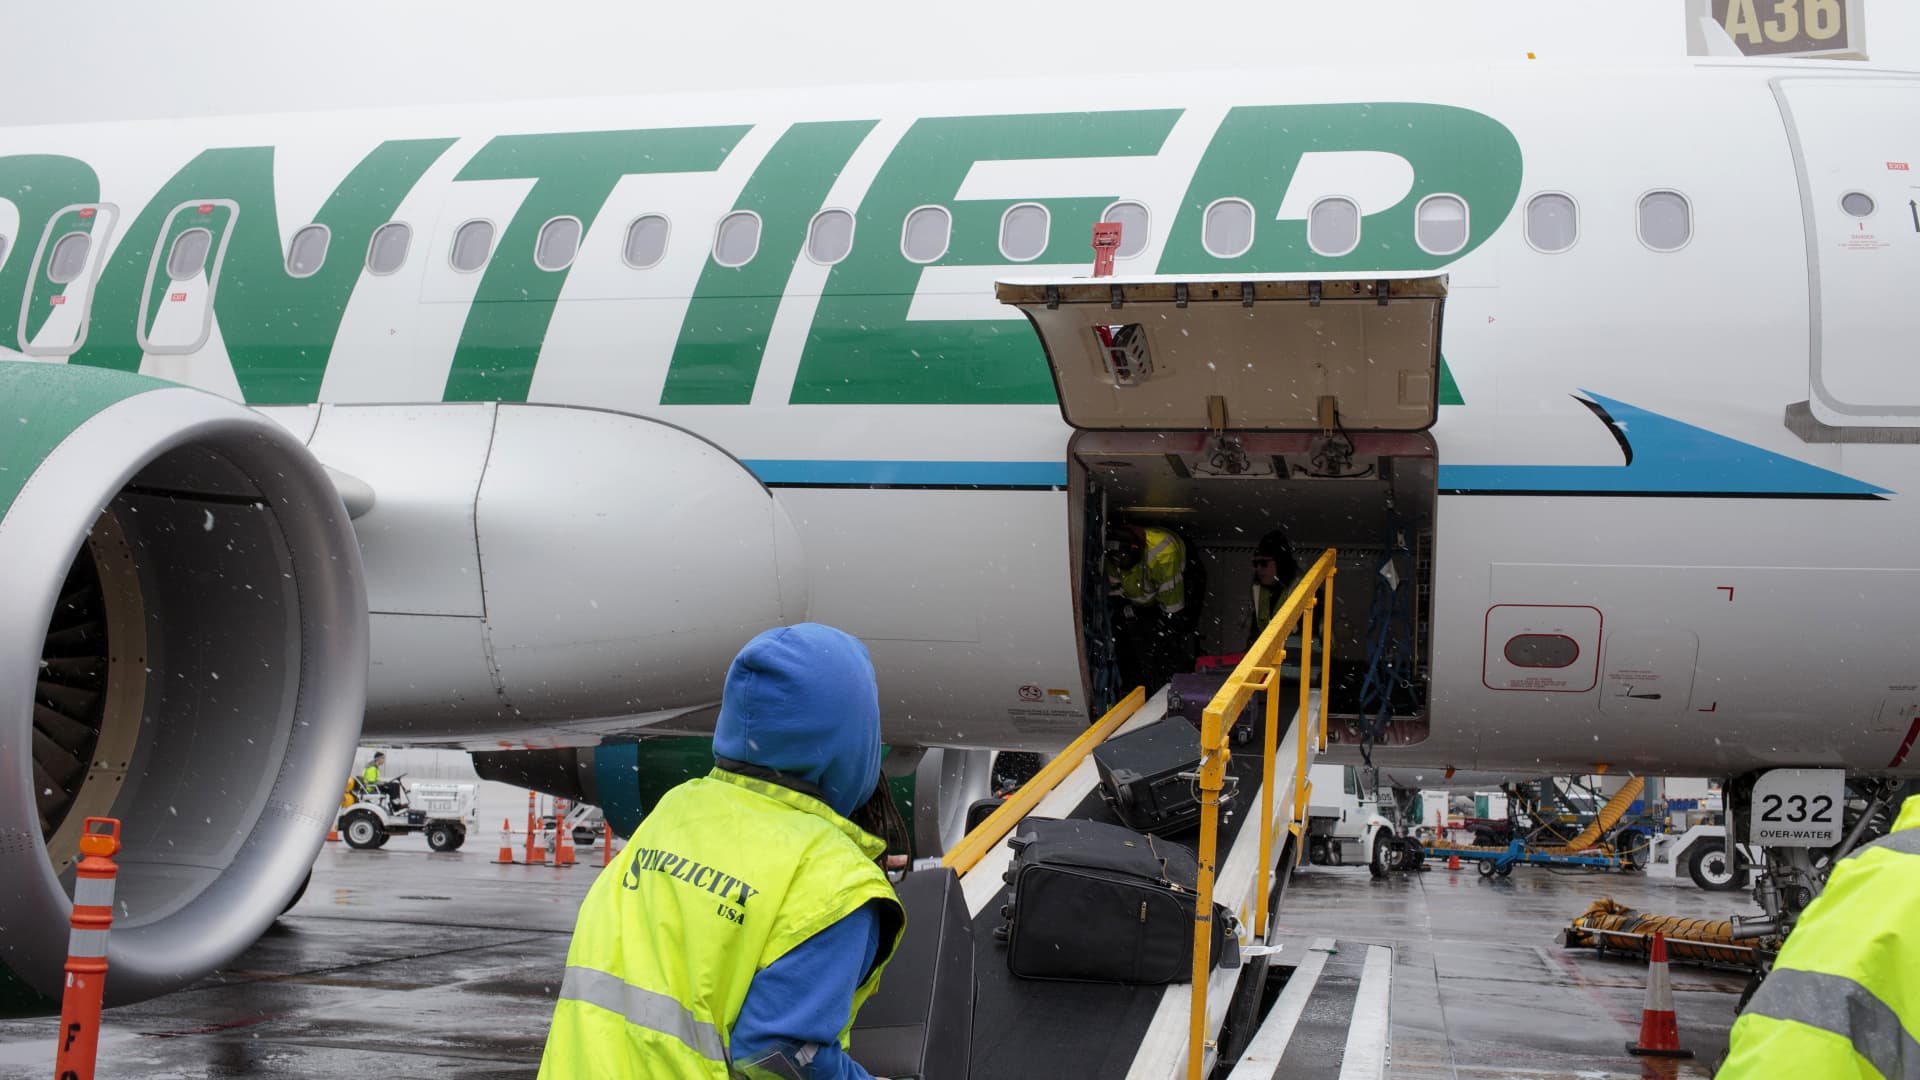 Frontier Airlines rescinds empty middle seat charge after lawmaker pressure